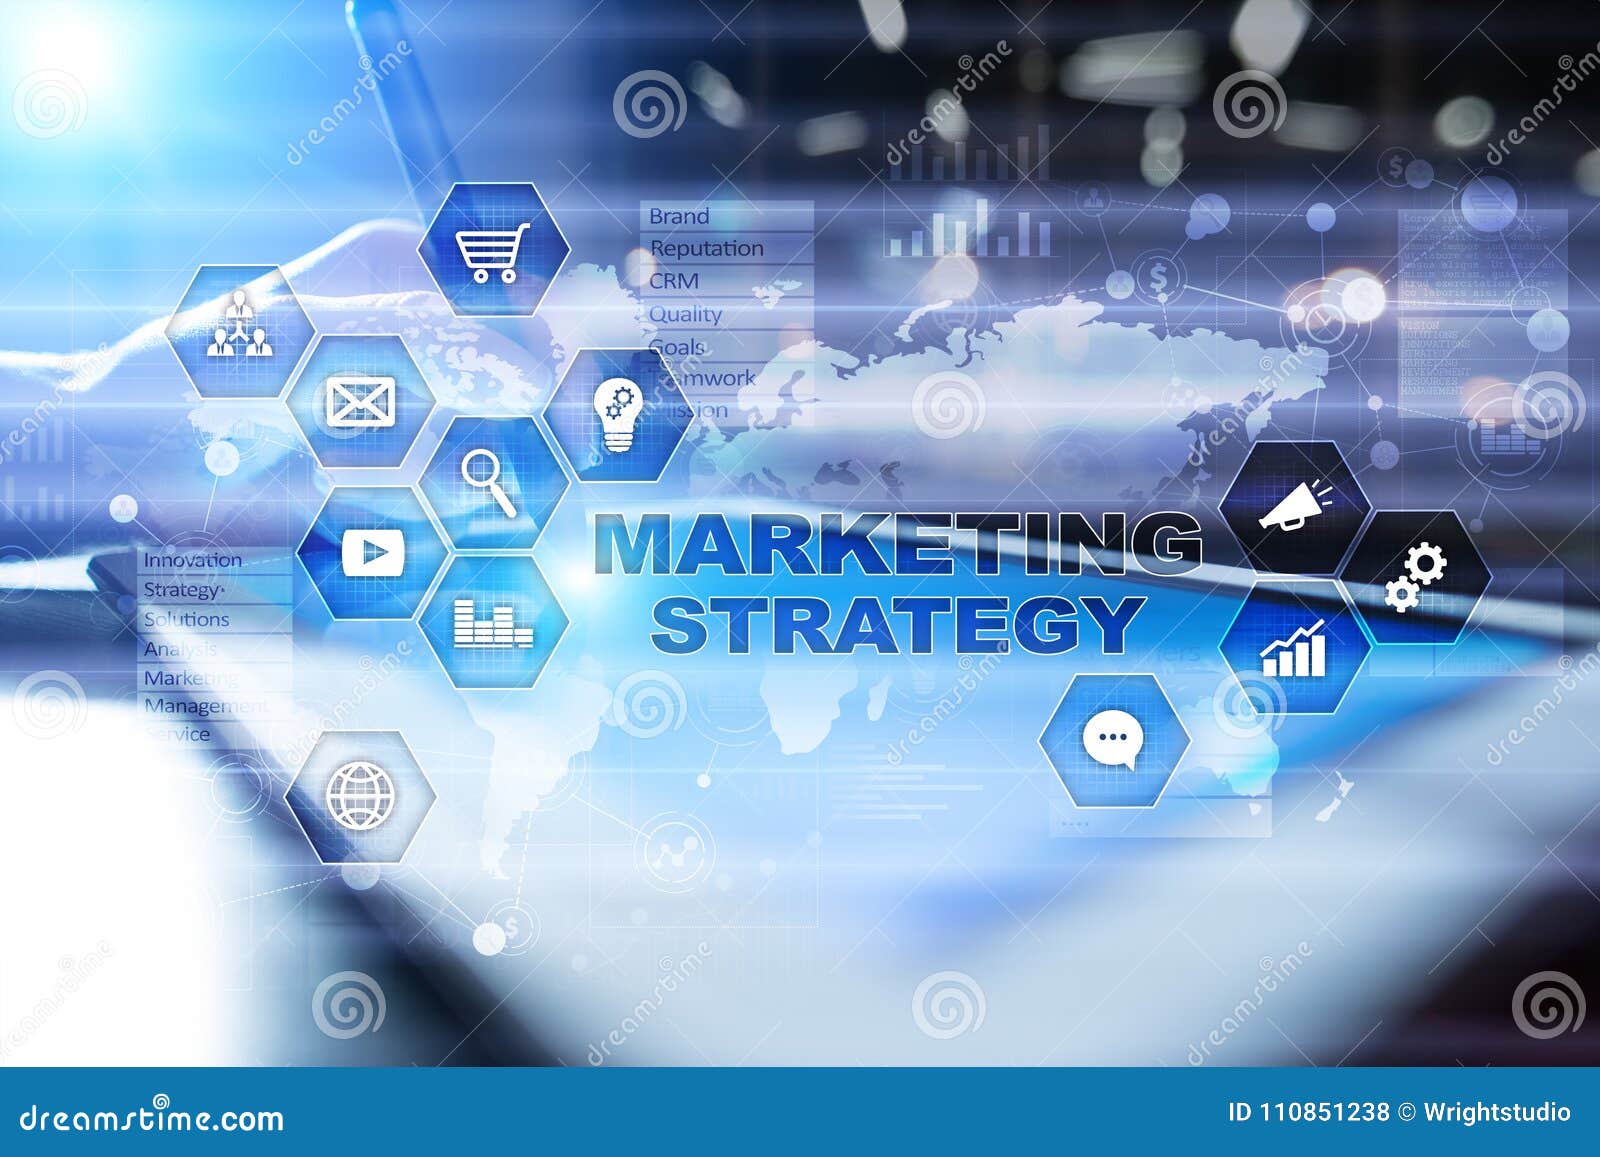 marketing strategy concept on virtual screen. internet, advertising and digital technology concept. sales growth.